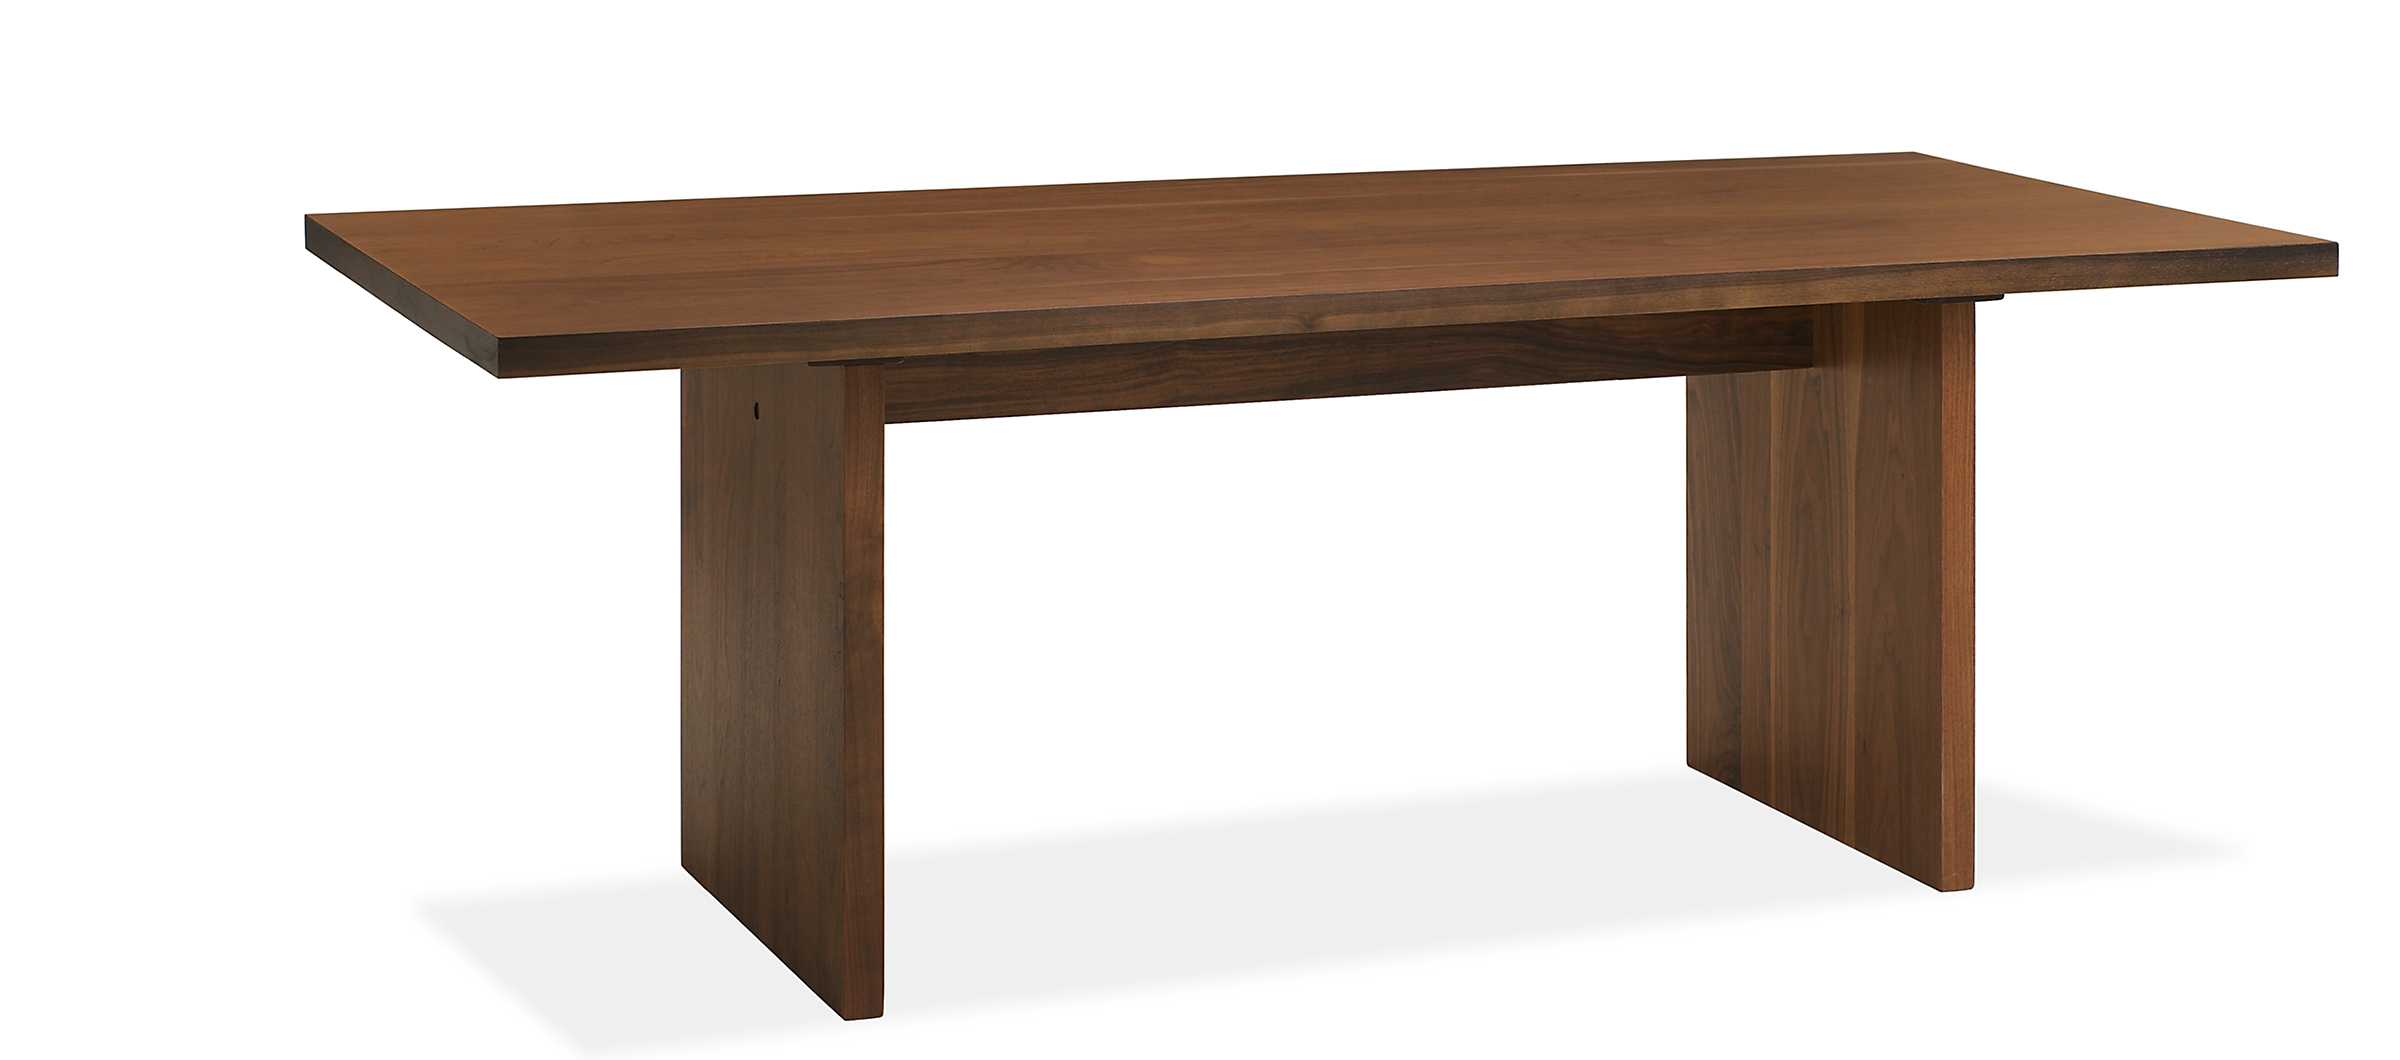 Corbett Table by the Inch